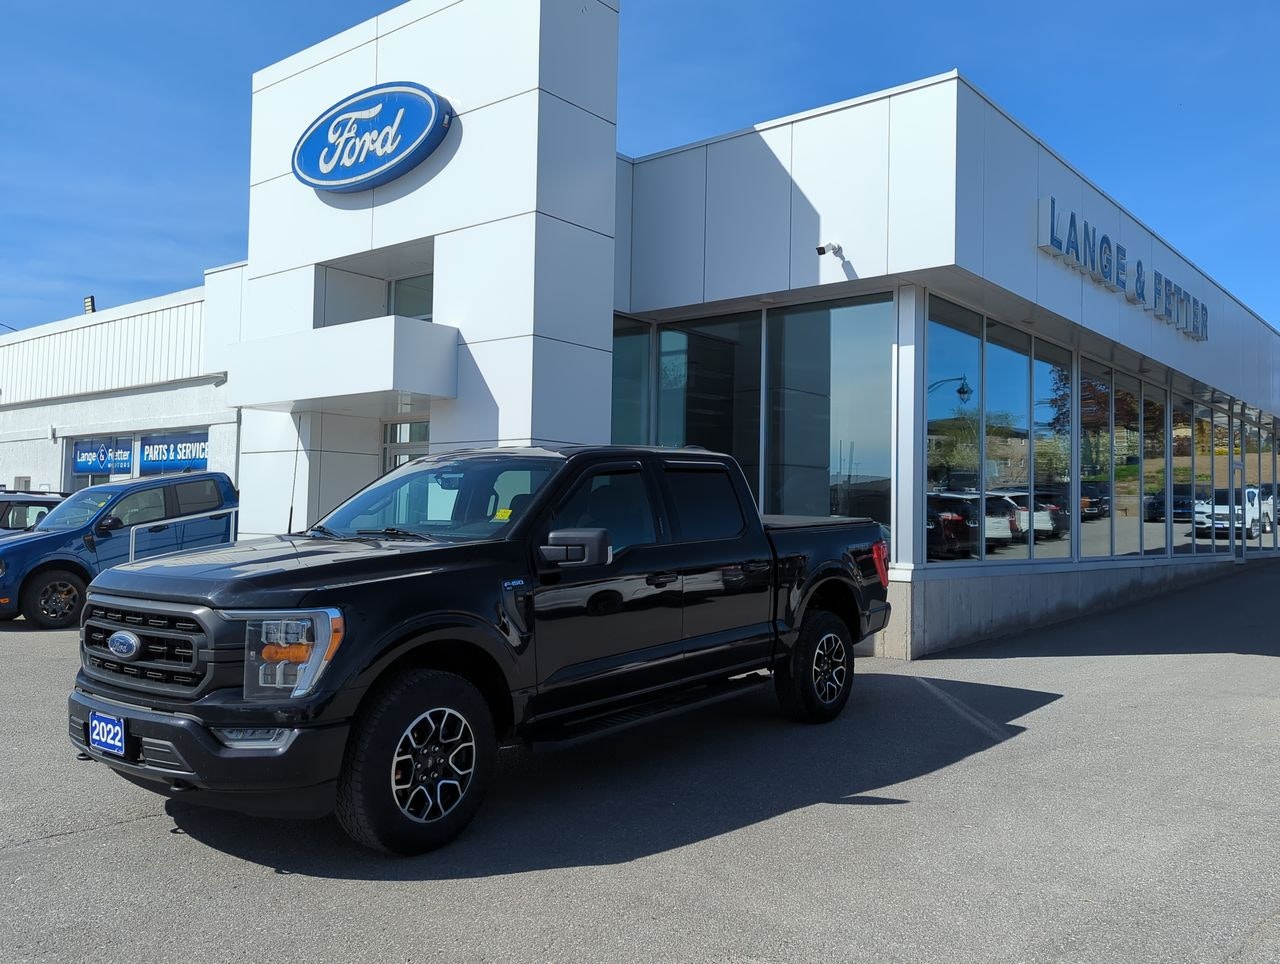 2022 Ford F-150 - 21789A Full Image 1